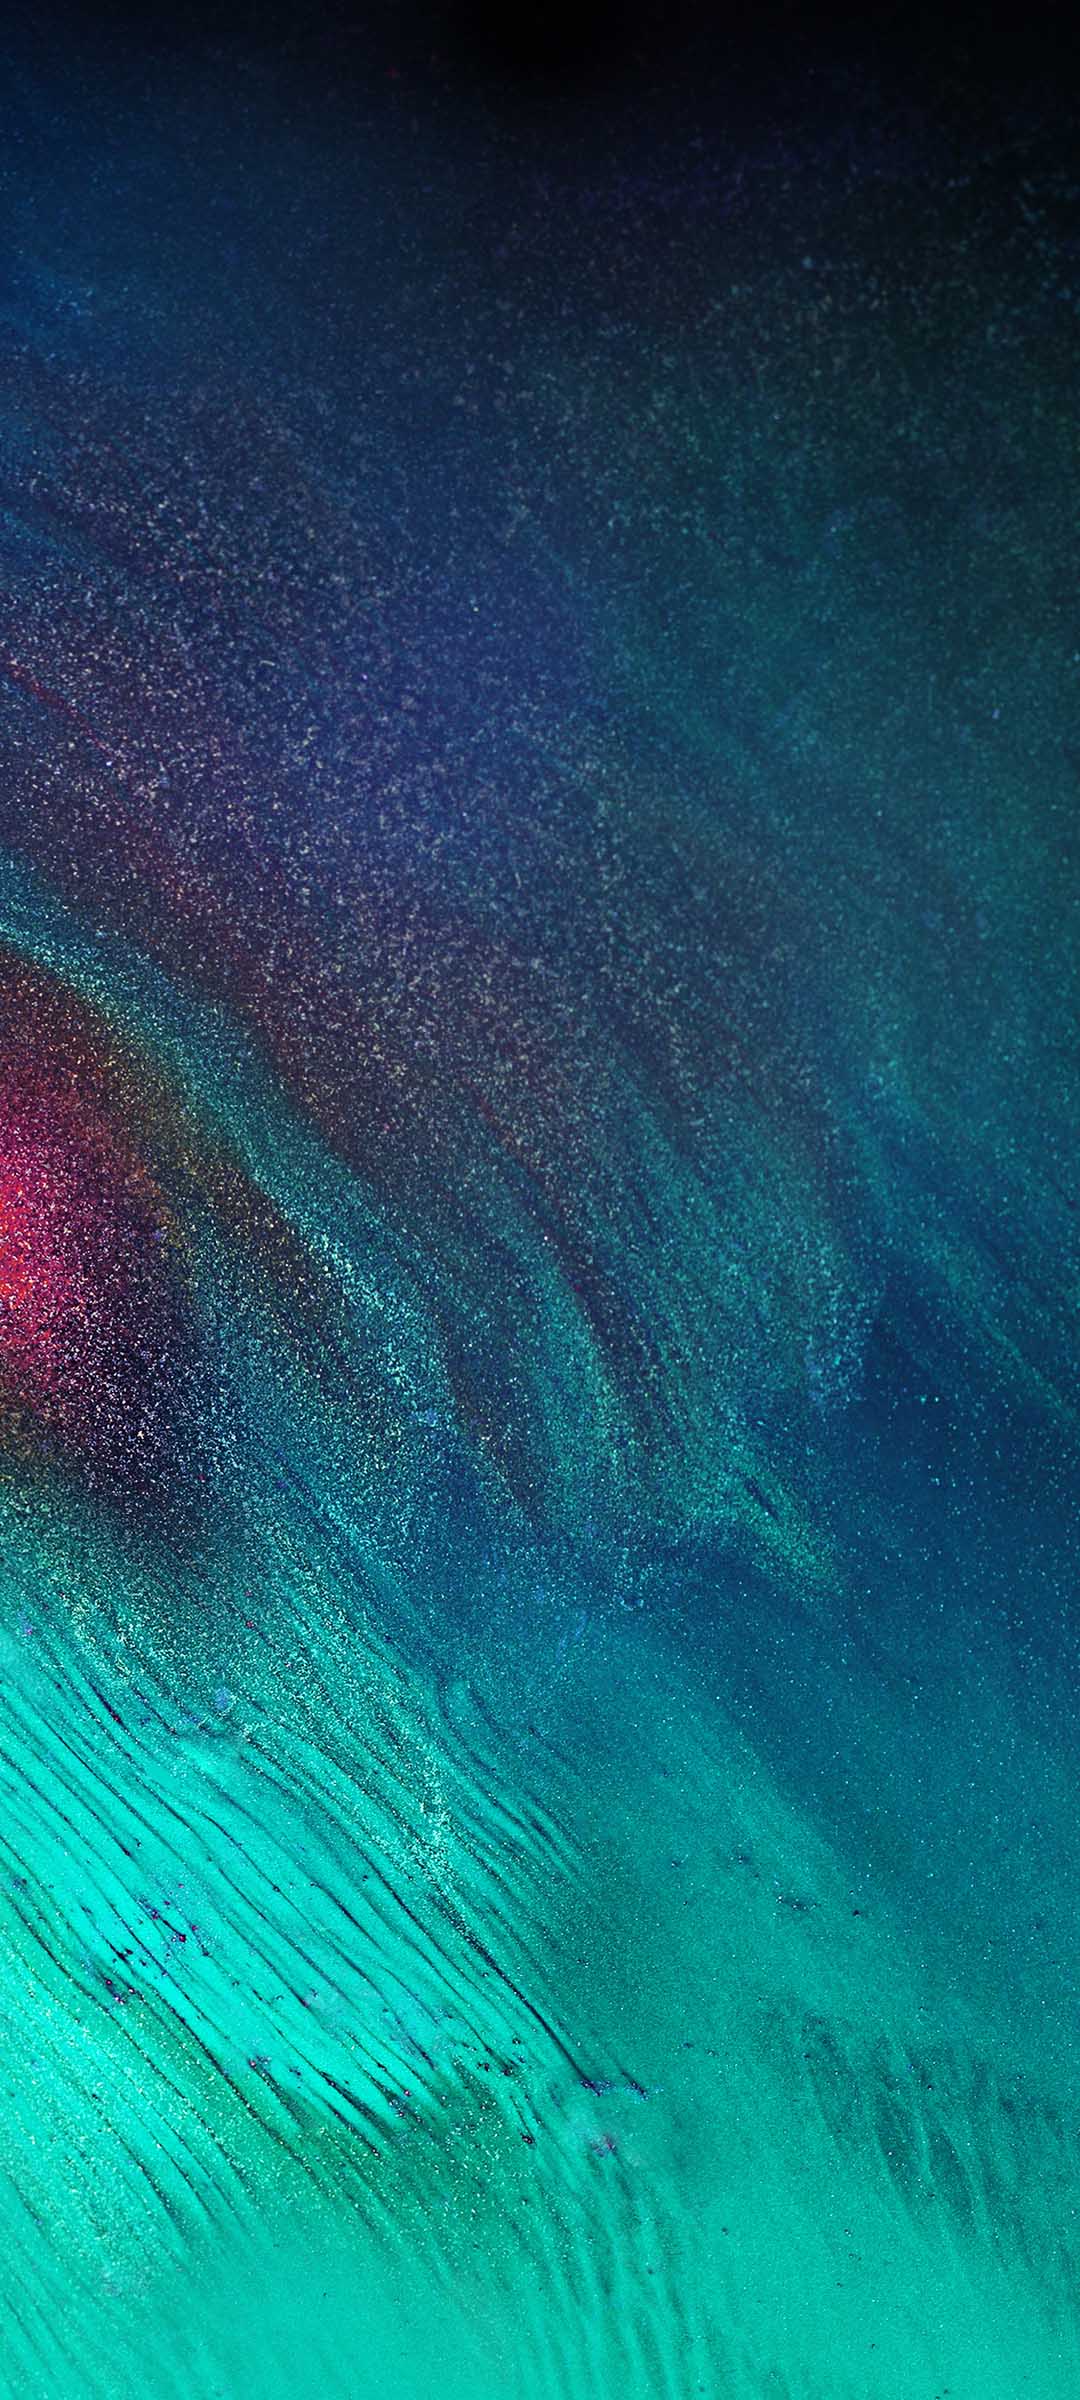 Download Samsung Galaxy A70 Wallpapers